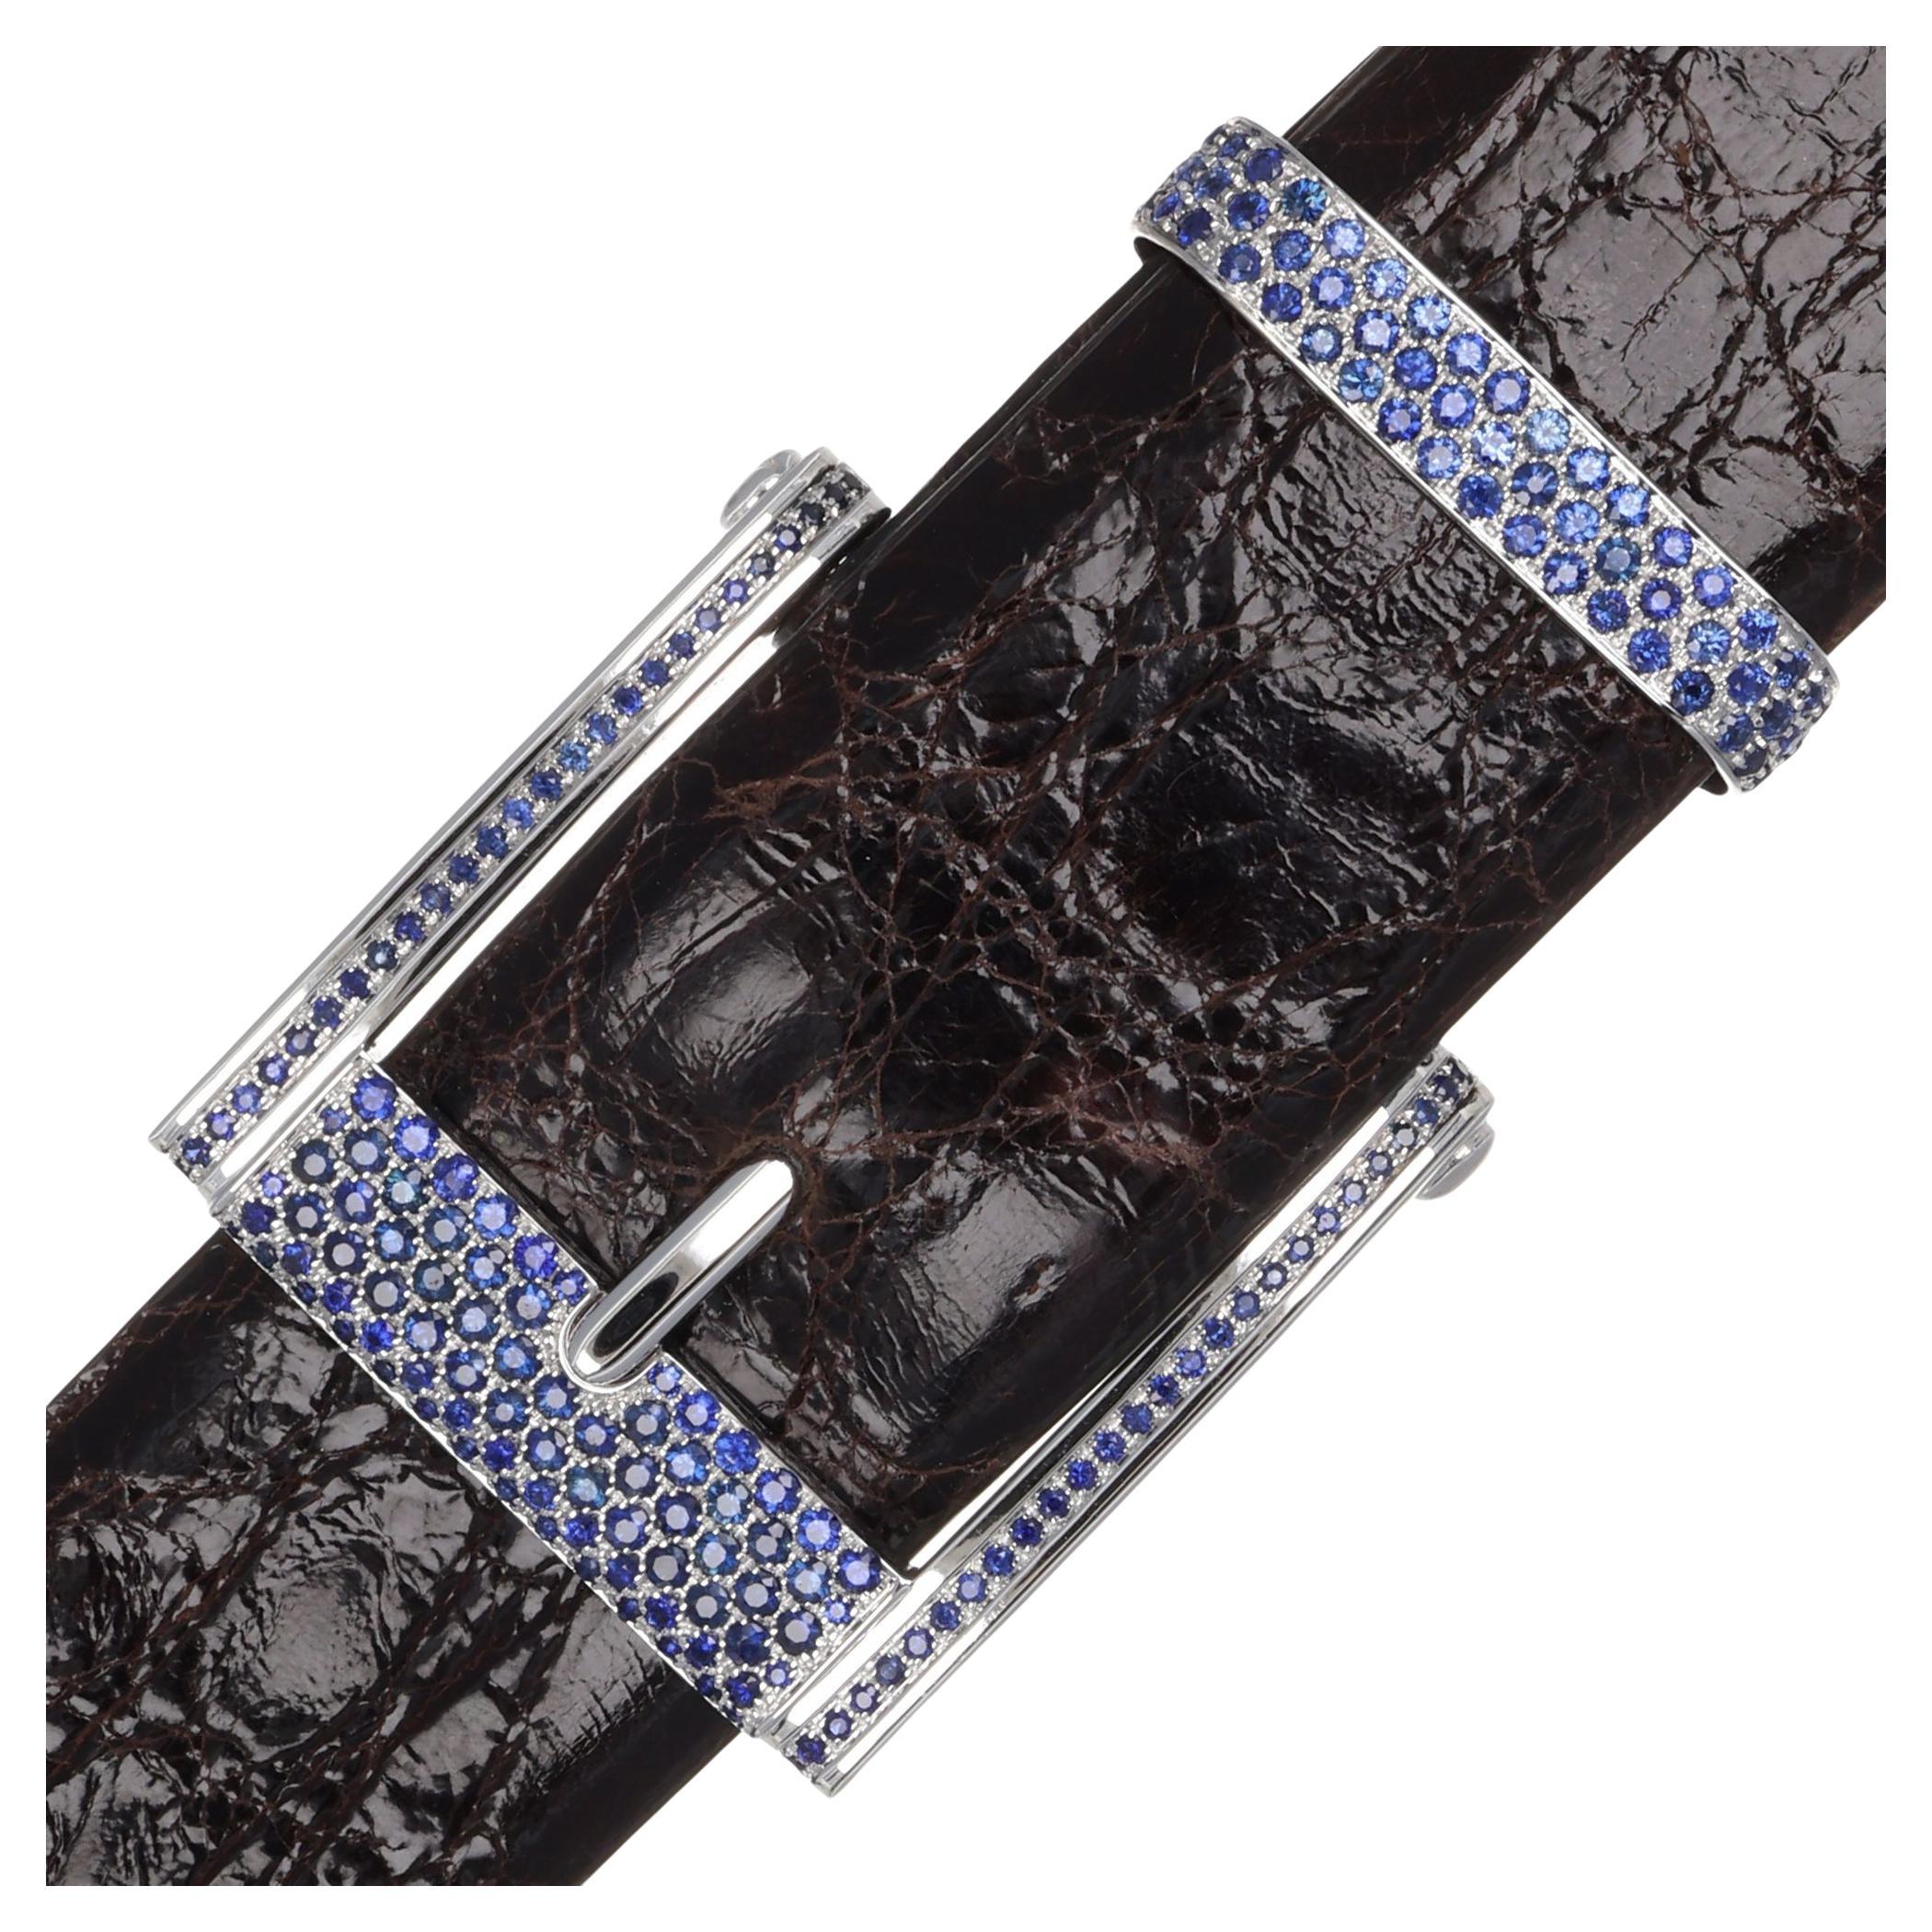 18Kt White Gold Precious Belt Buckle Blue Sapphires 6.99 ct Made in Italy Gift 